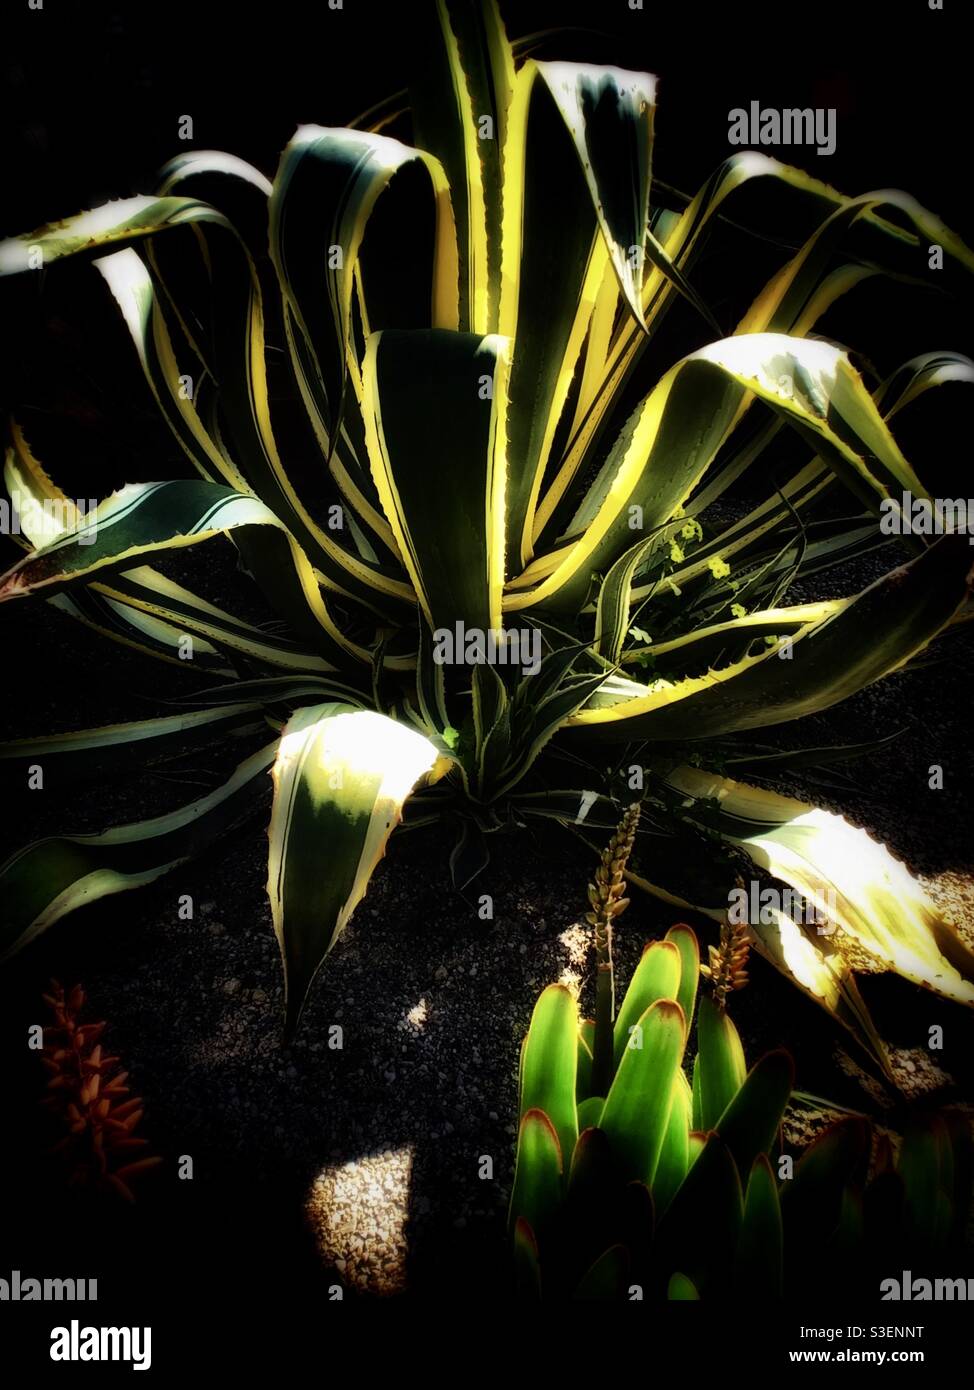 The Agave attenuata Salm-Dyck plant among the others in the drama lighting depiction Stock Photo